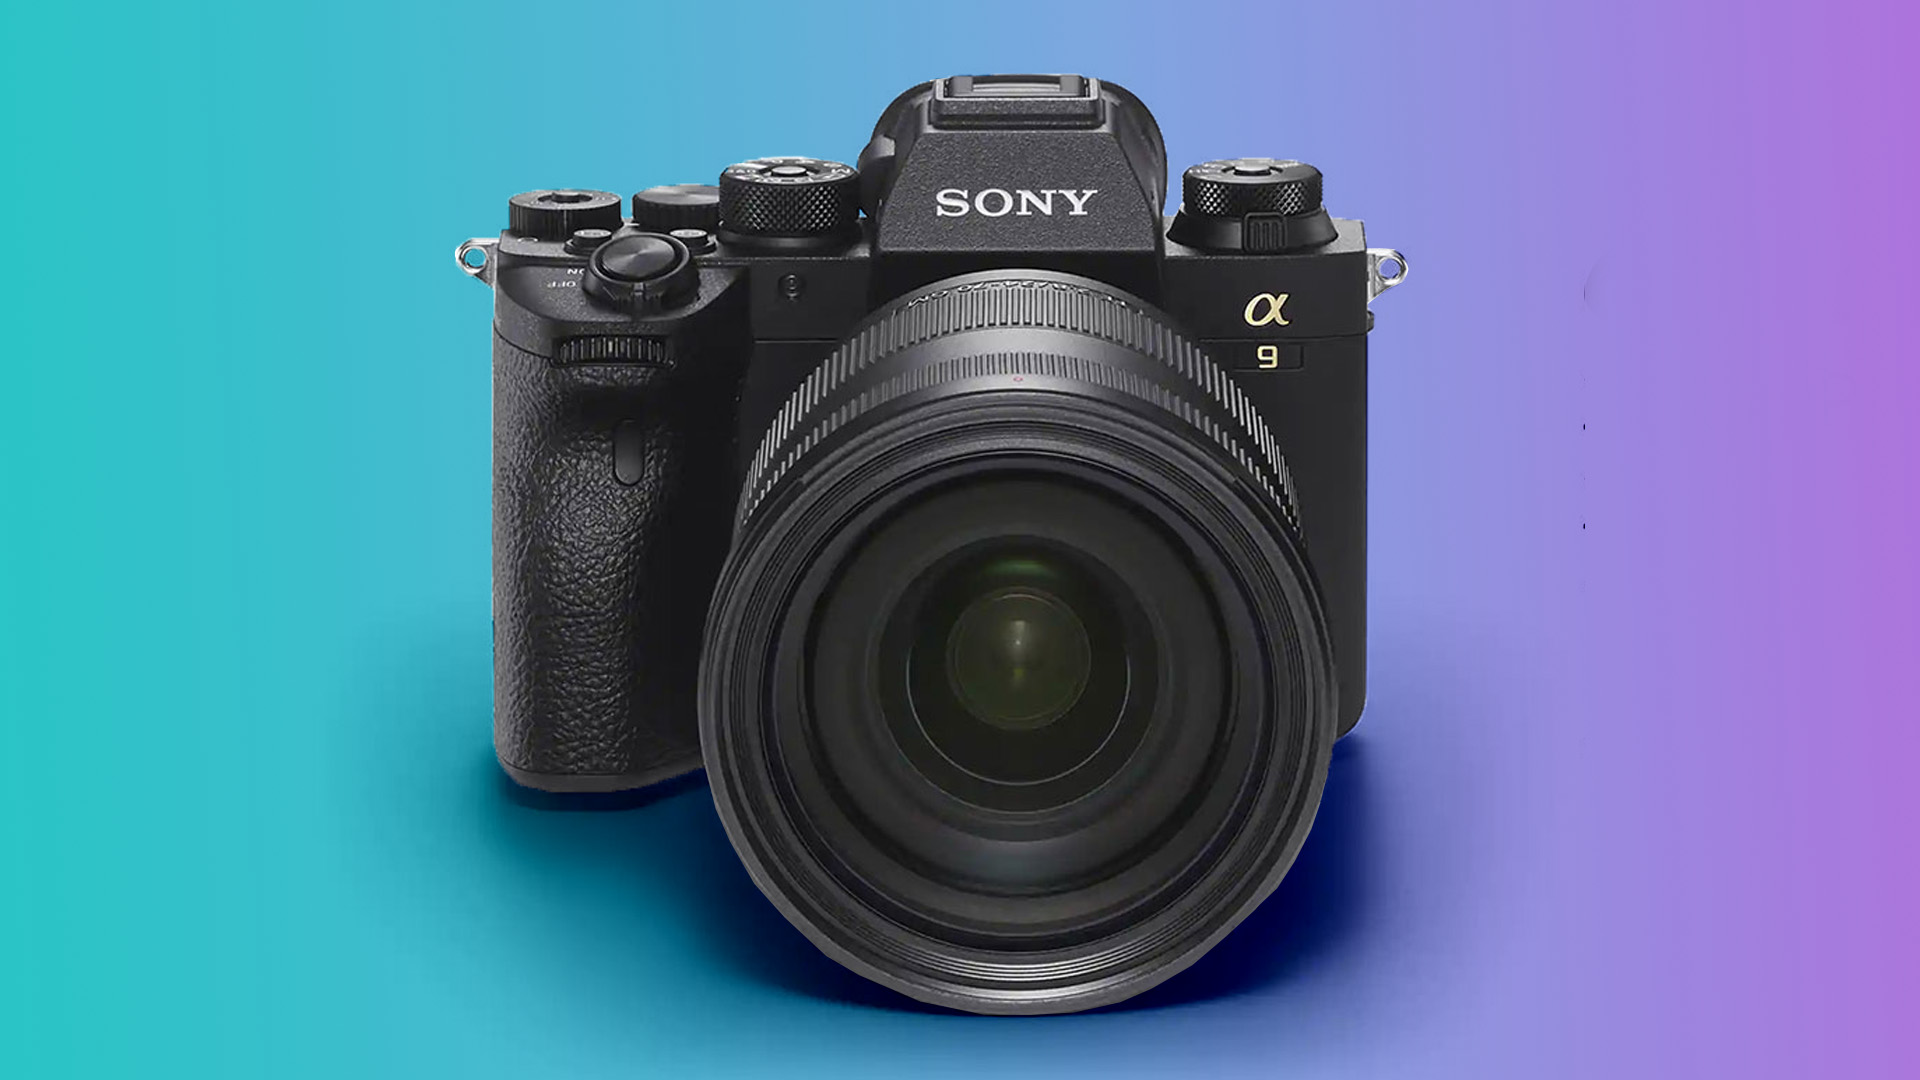 Sony A9 III everything we know so far and what we want to see